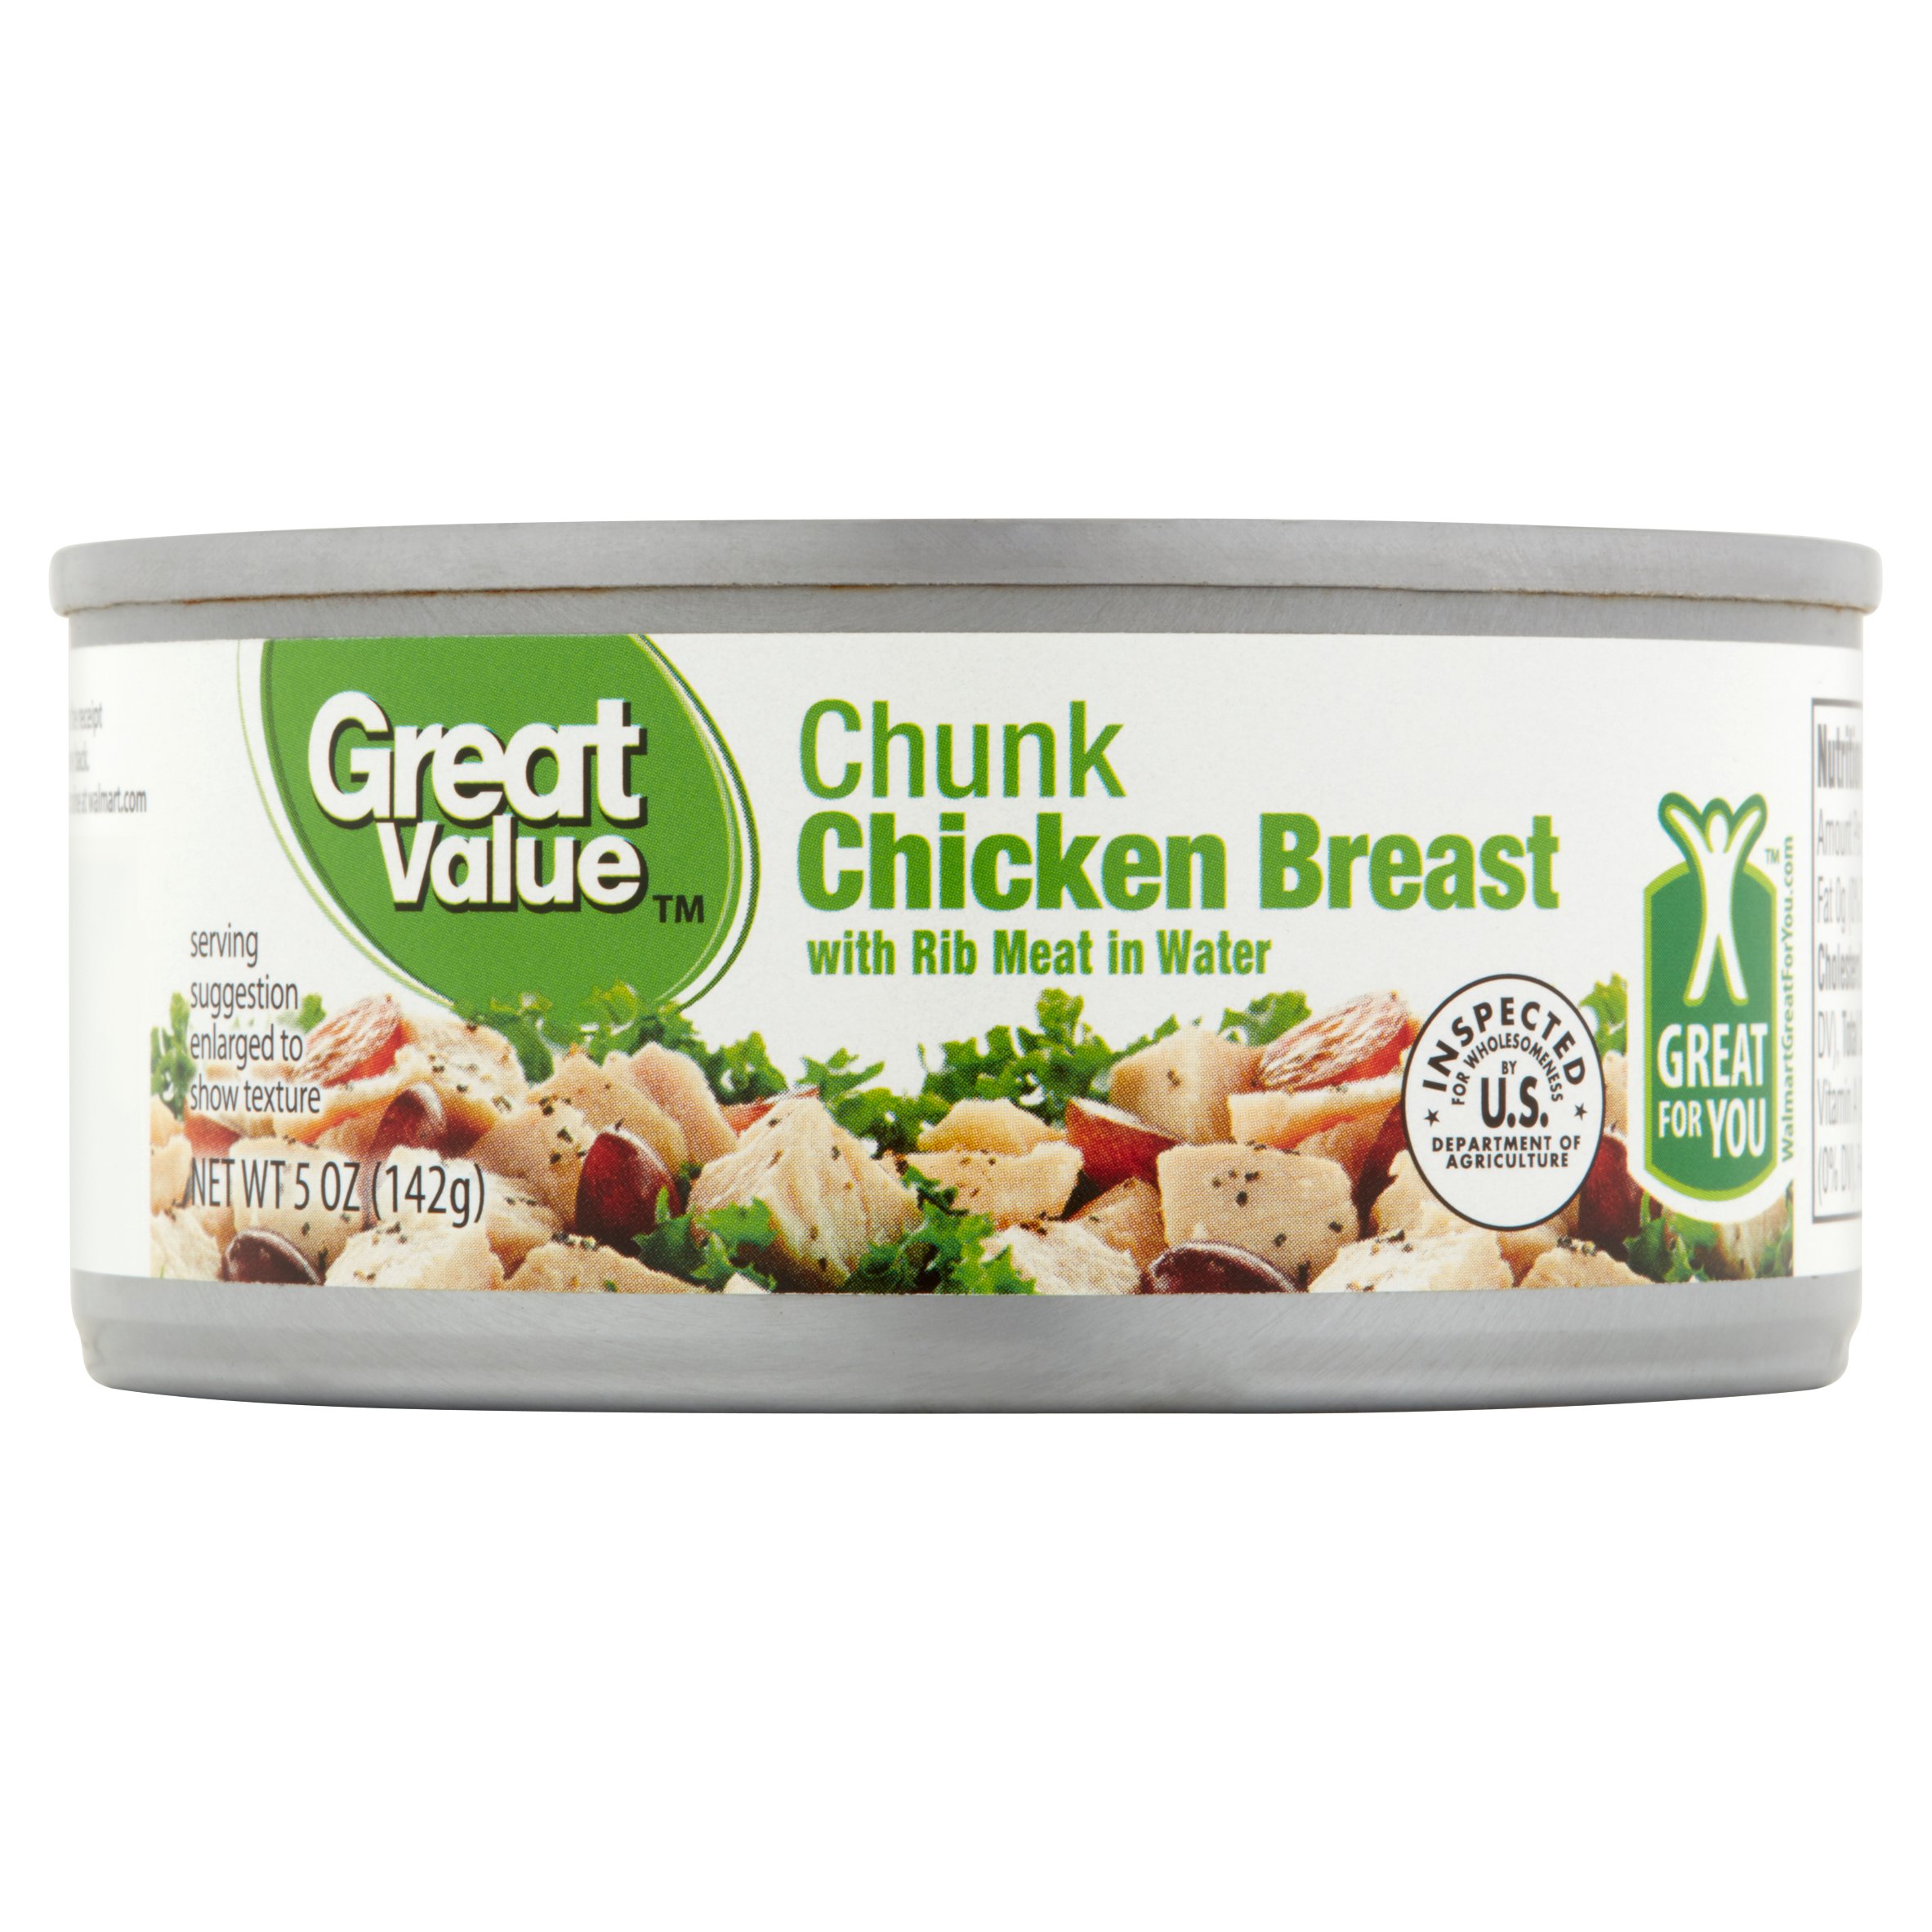 (4 Pack) Great Value Chunk Chicken Breast with Rib Meat in Water, 5 Oz